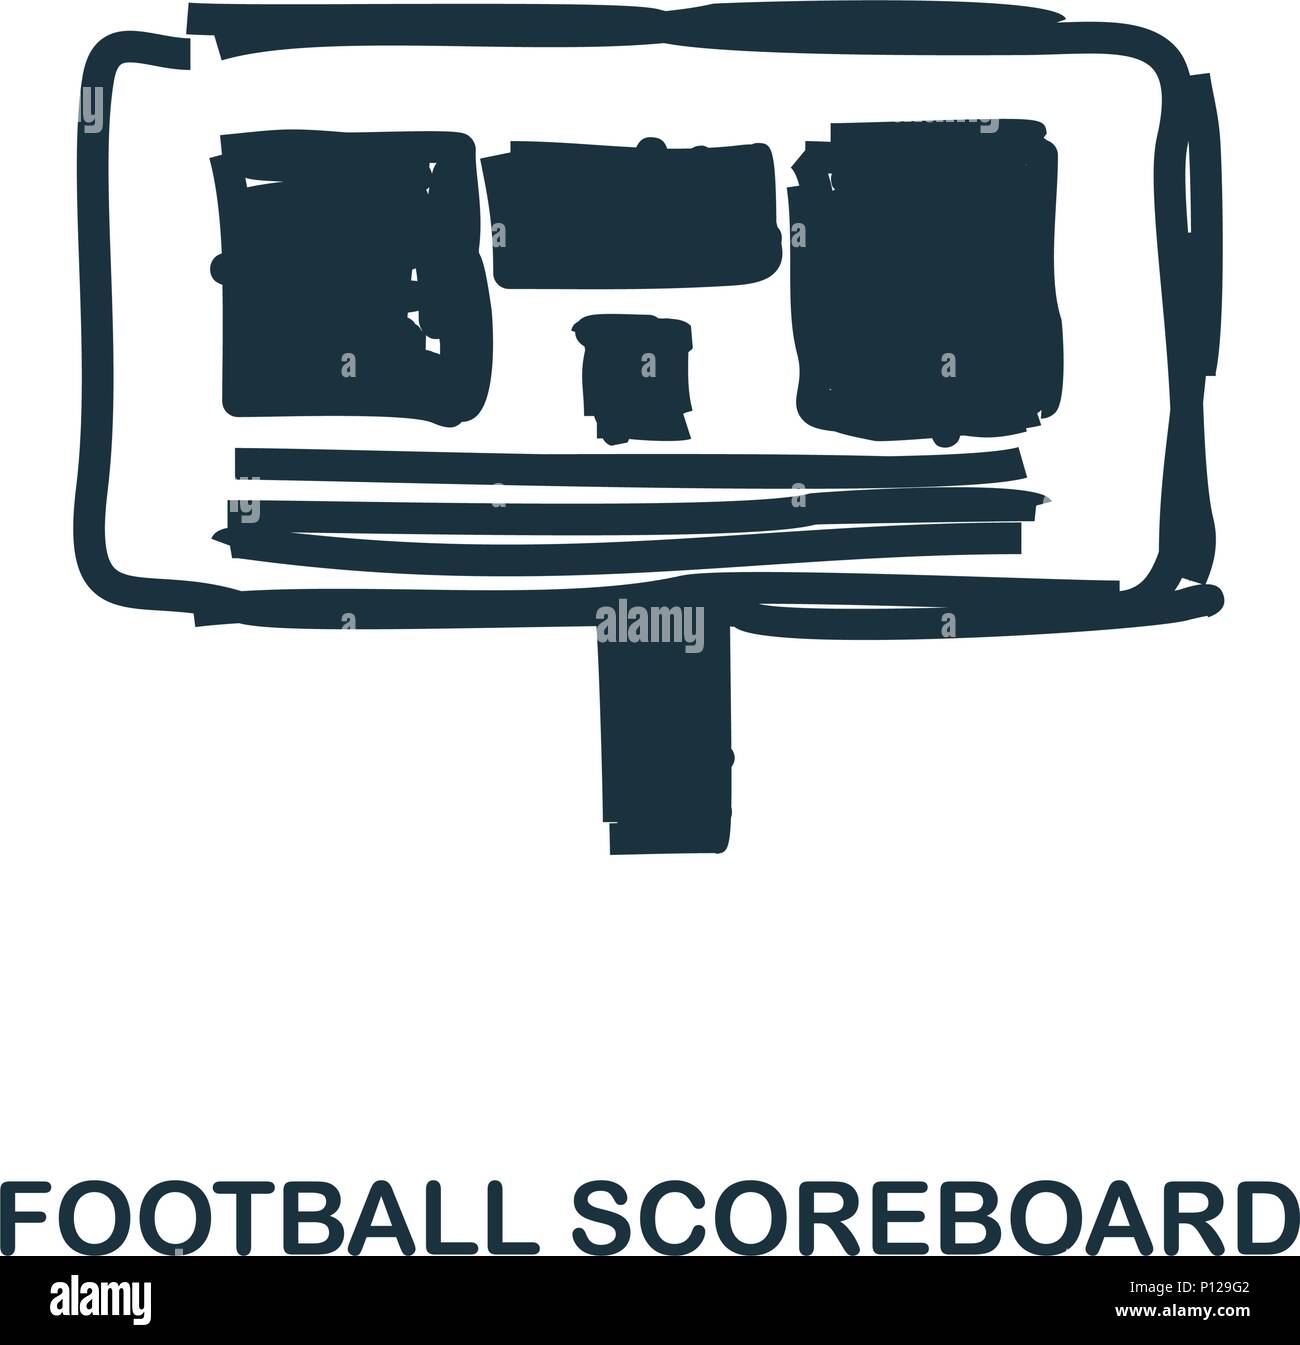 Football Scoreboard icon. Mobile apps, printing and more usage. Simple element sing. Monochrome Football Scoreboard icon illustration. Stock Vector